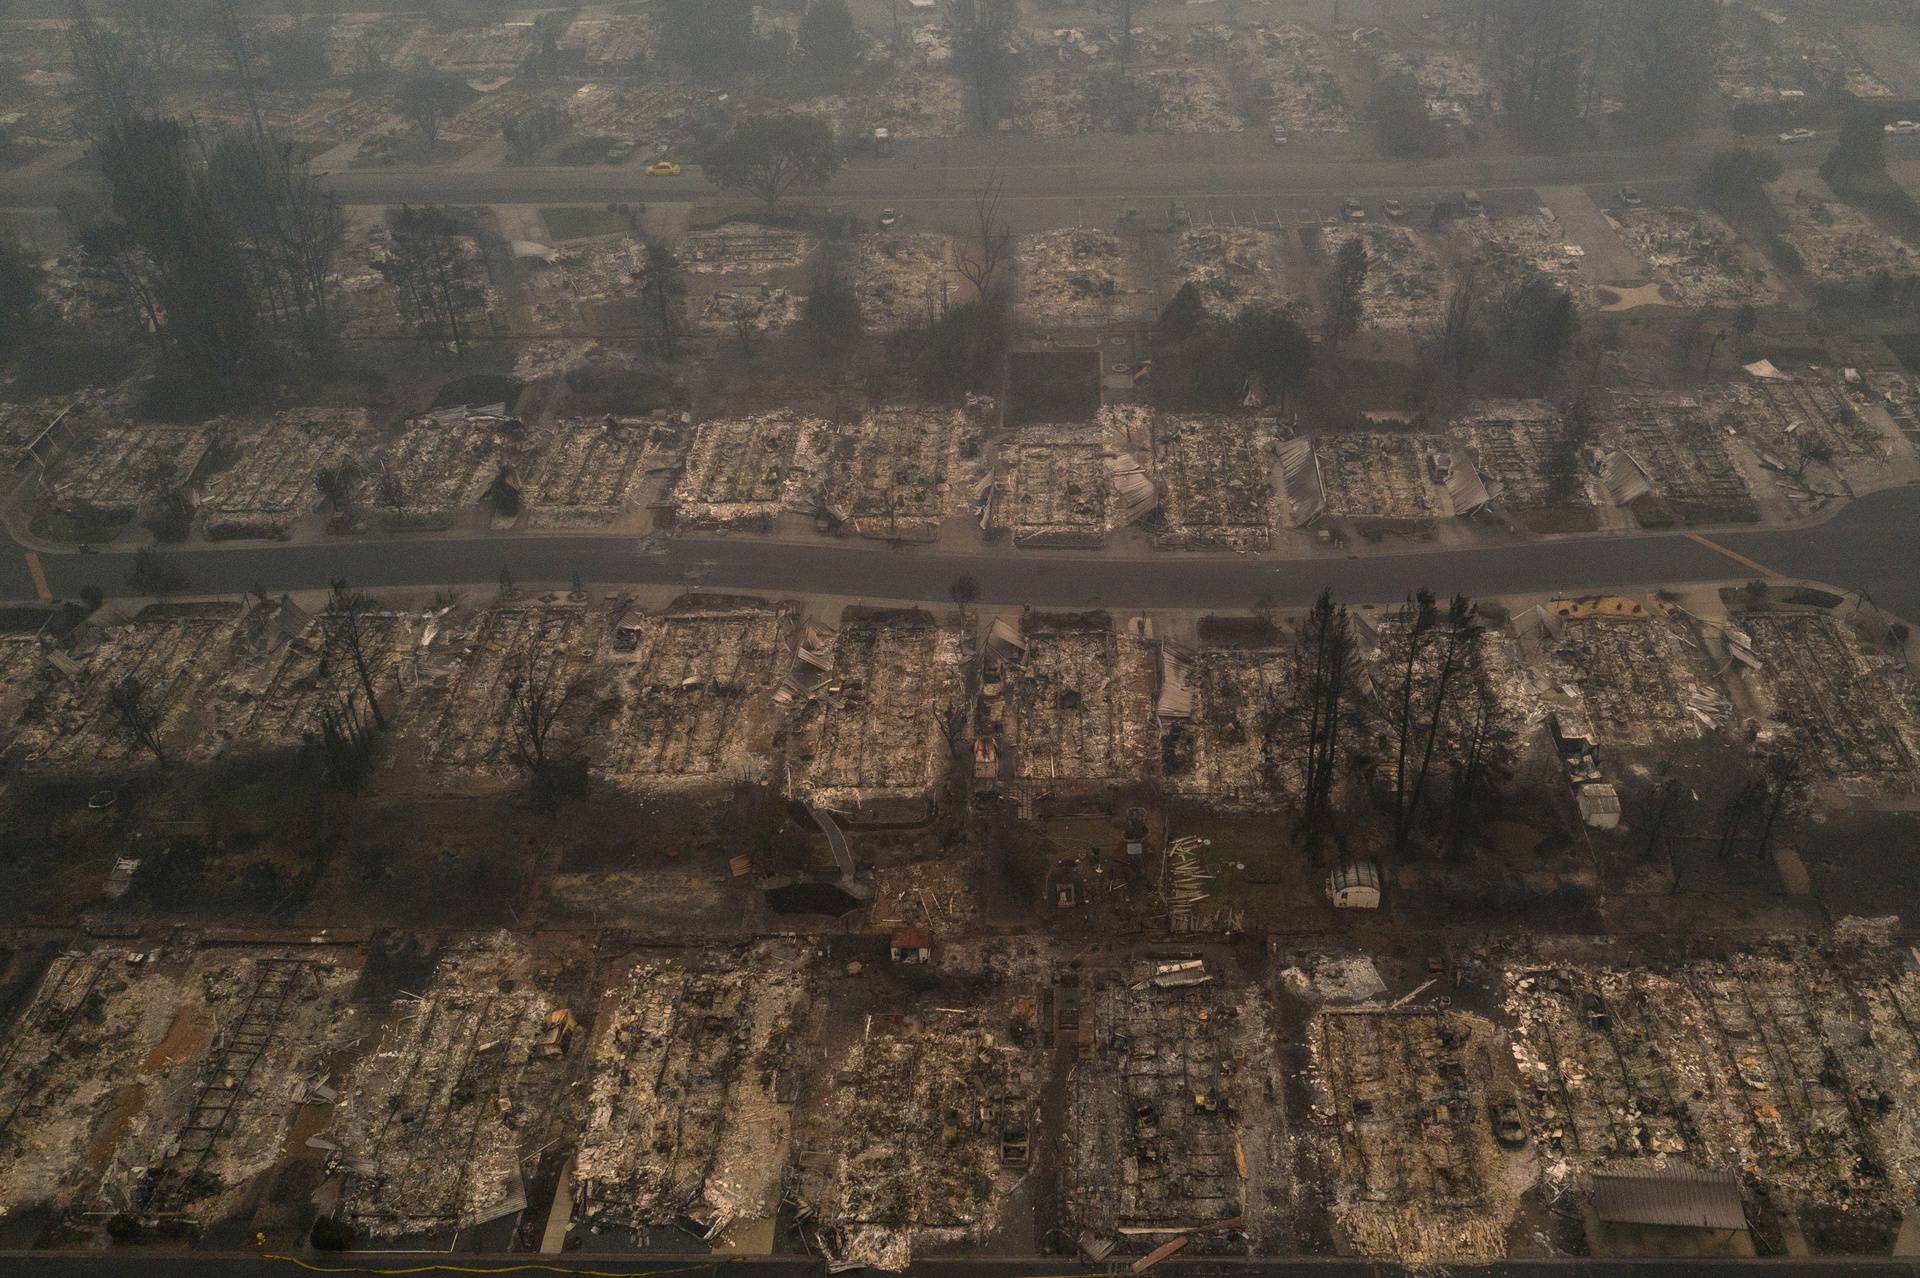 The gutted Medford Estates neighborhood in the aftermath of the Almeda fire in Medford, Oregon